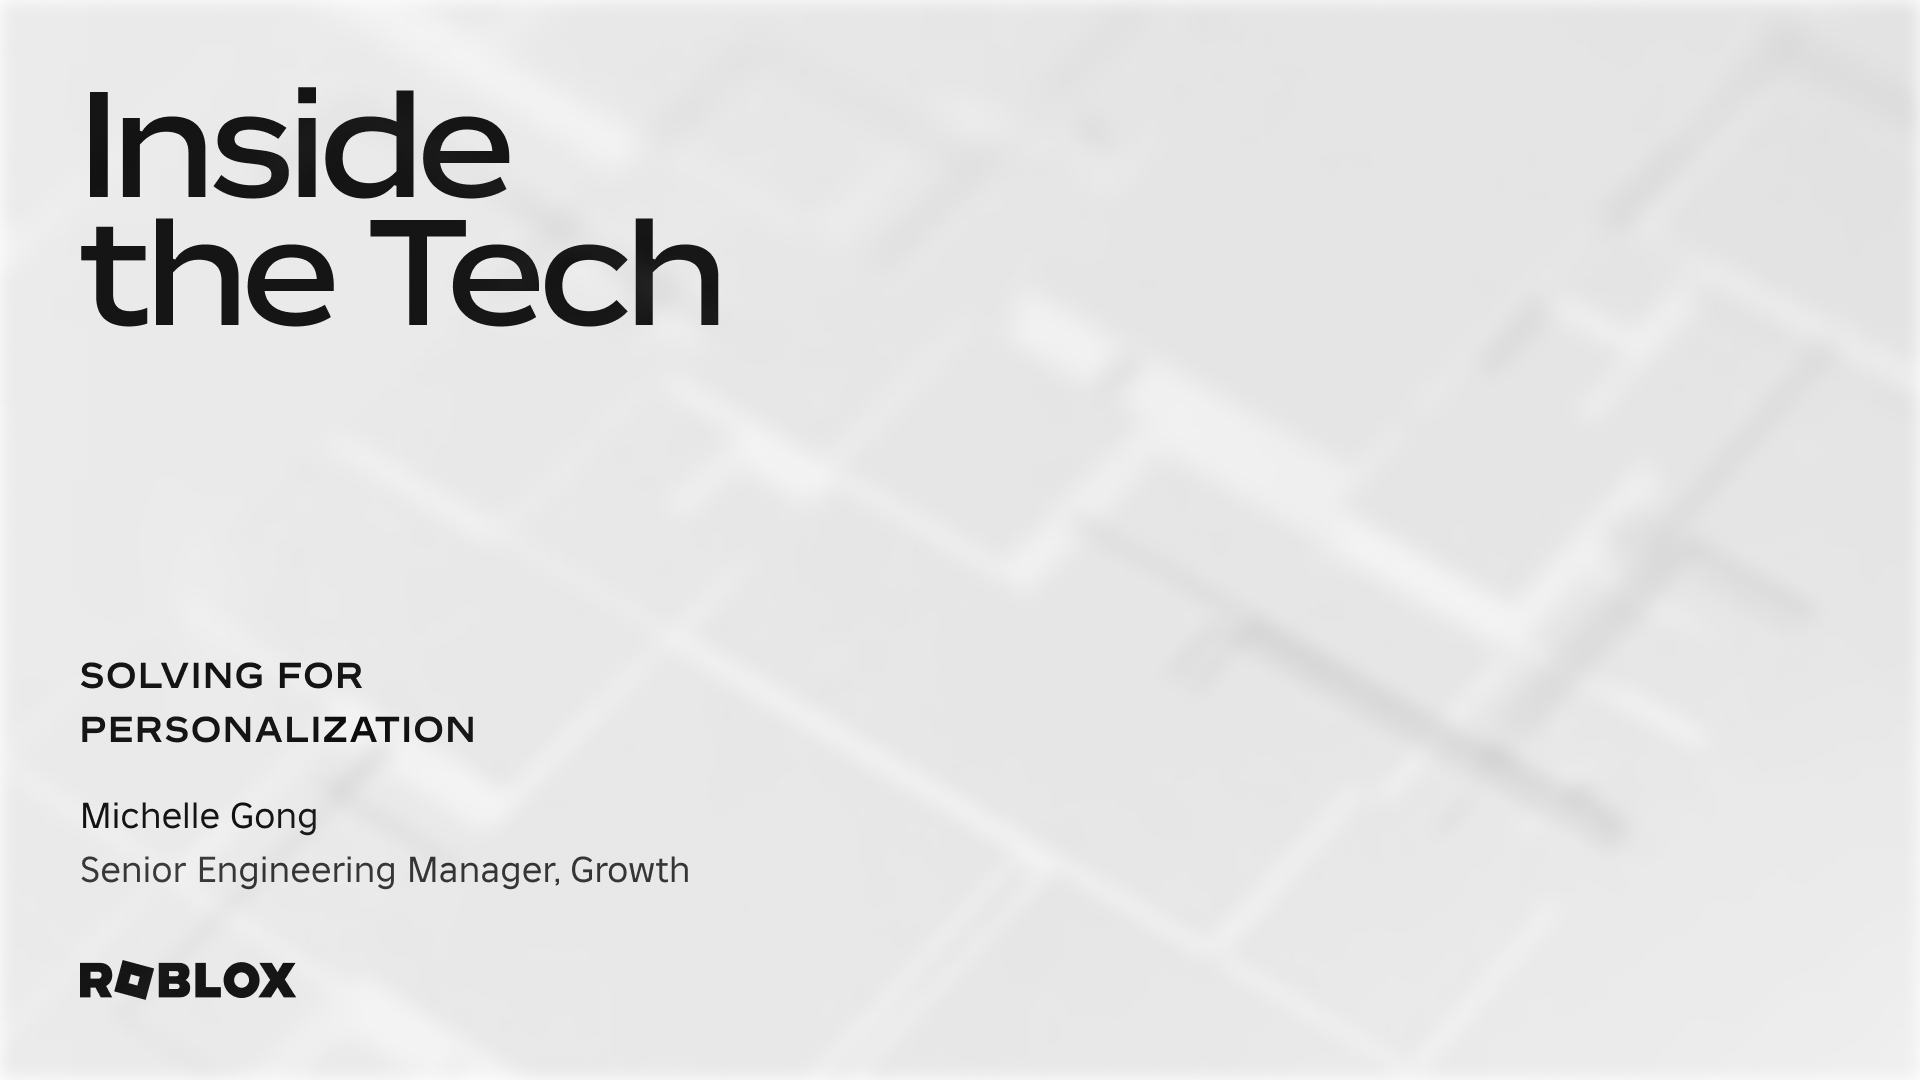 Inside the Tech is a blog series that goes hand-in-hand with our Tech Talks Podcast. Here, we dive further into key technical challenges we are tackling and share the unique approaches we are taking to do so. In this edition of Inside the Tech, we spoke with Senior Engineering Manager Michelle Gong to learn more ...